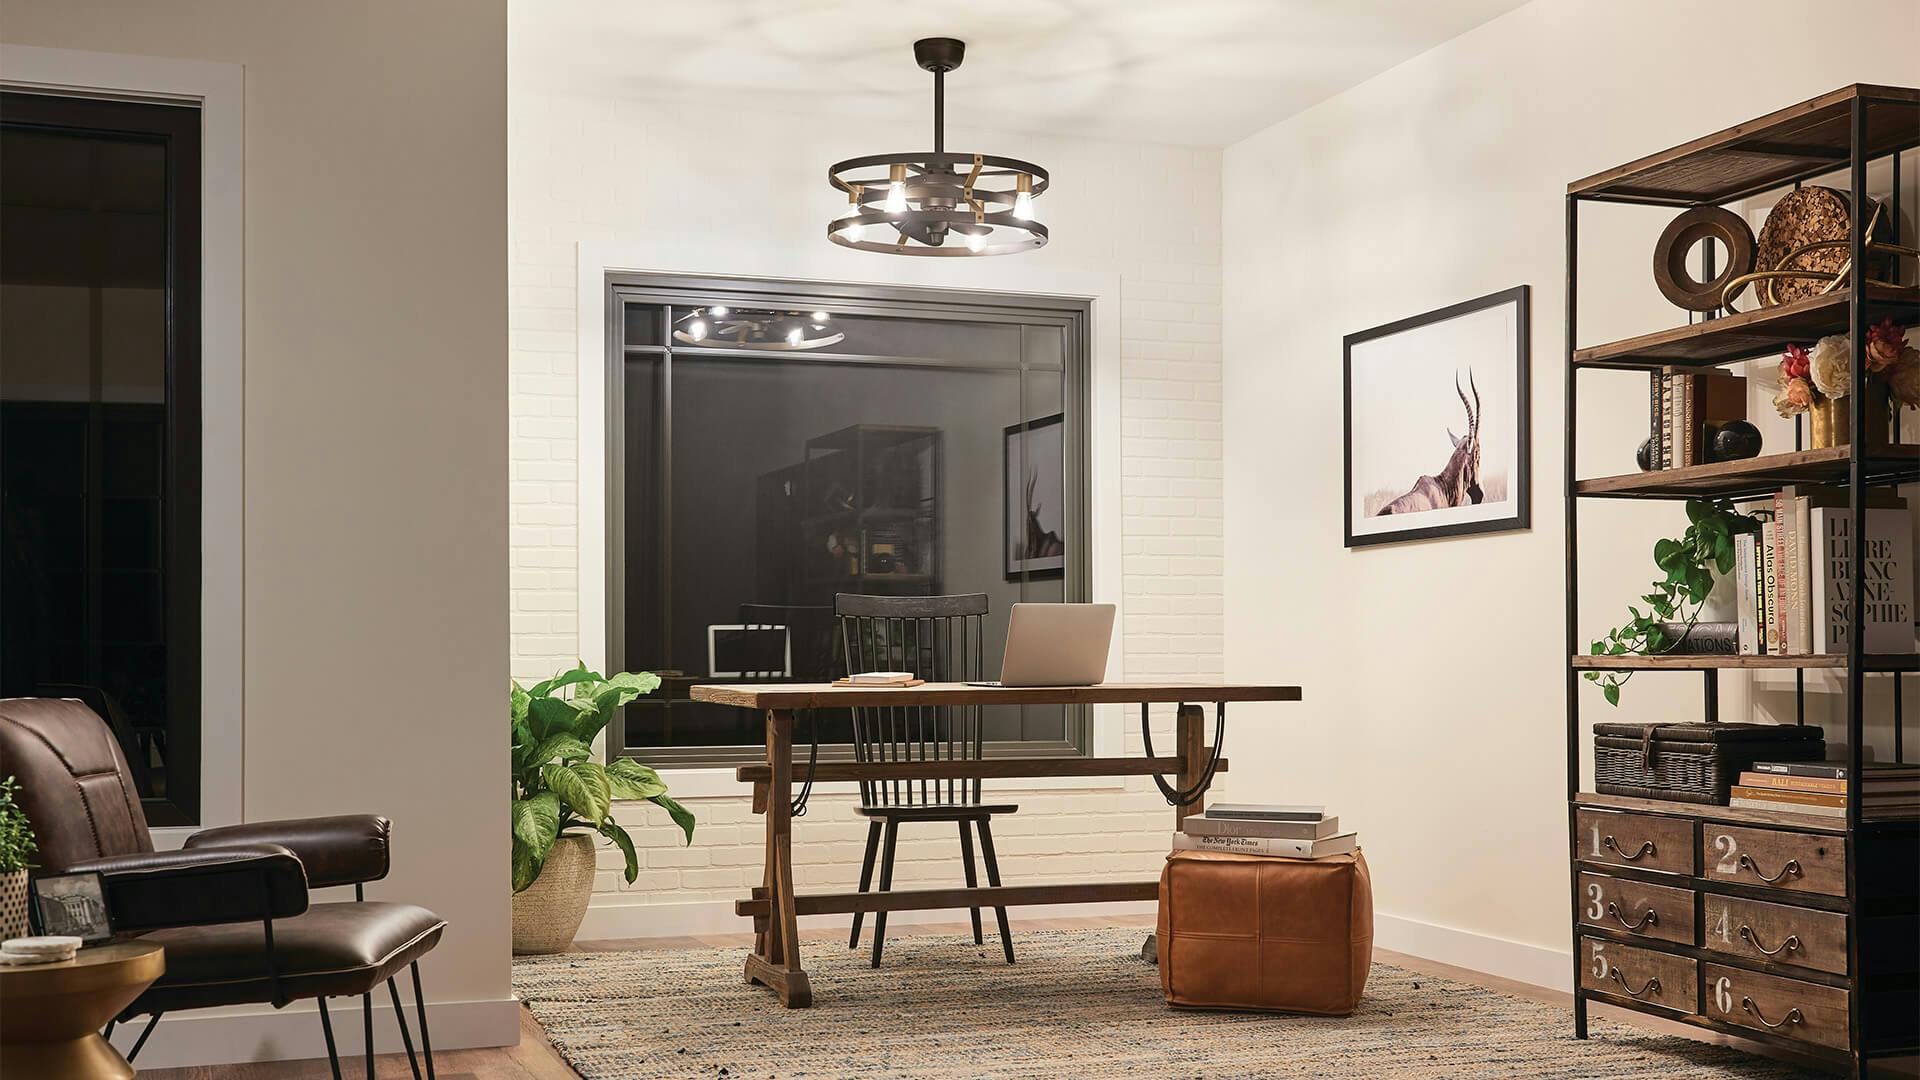 Mid-century modern office at night with Cavelli chandelier